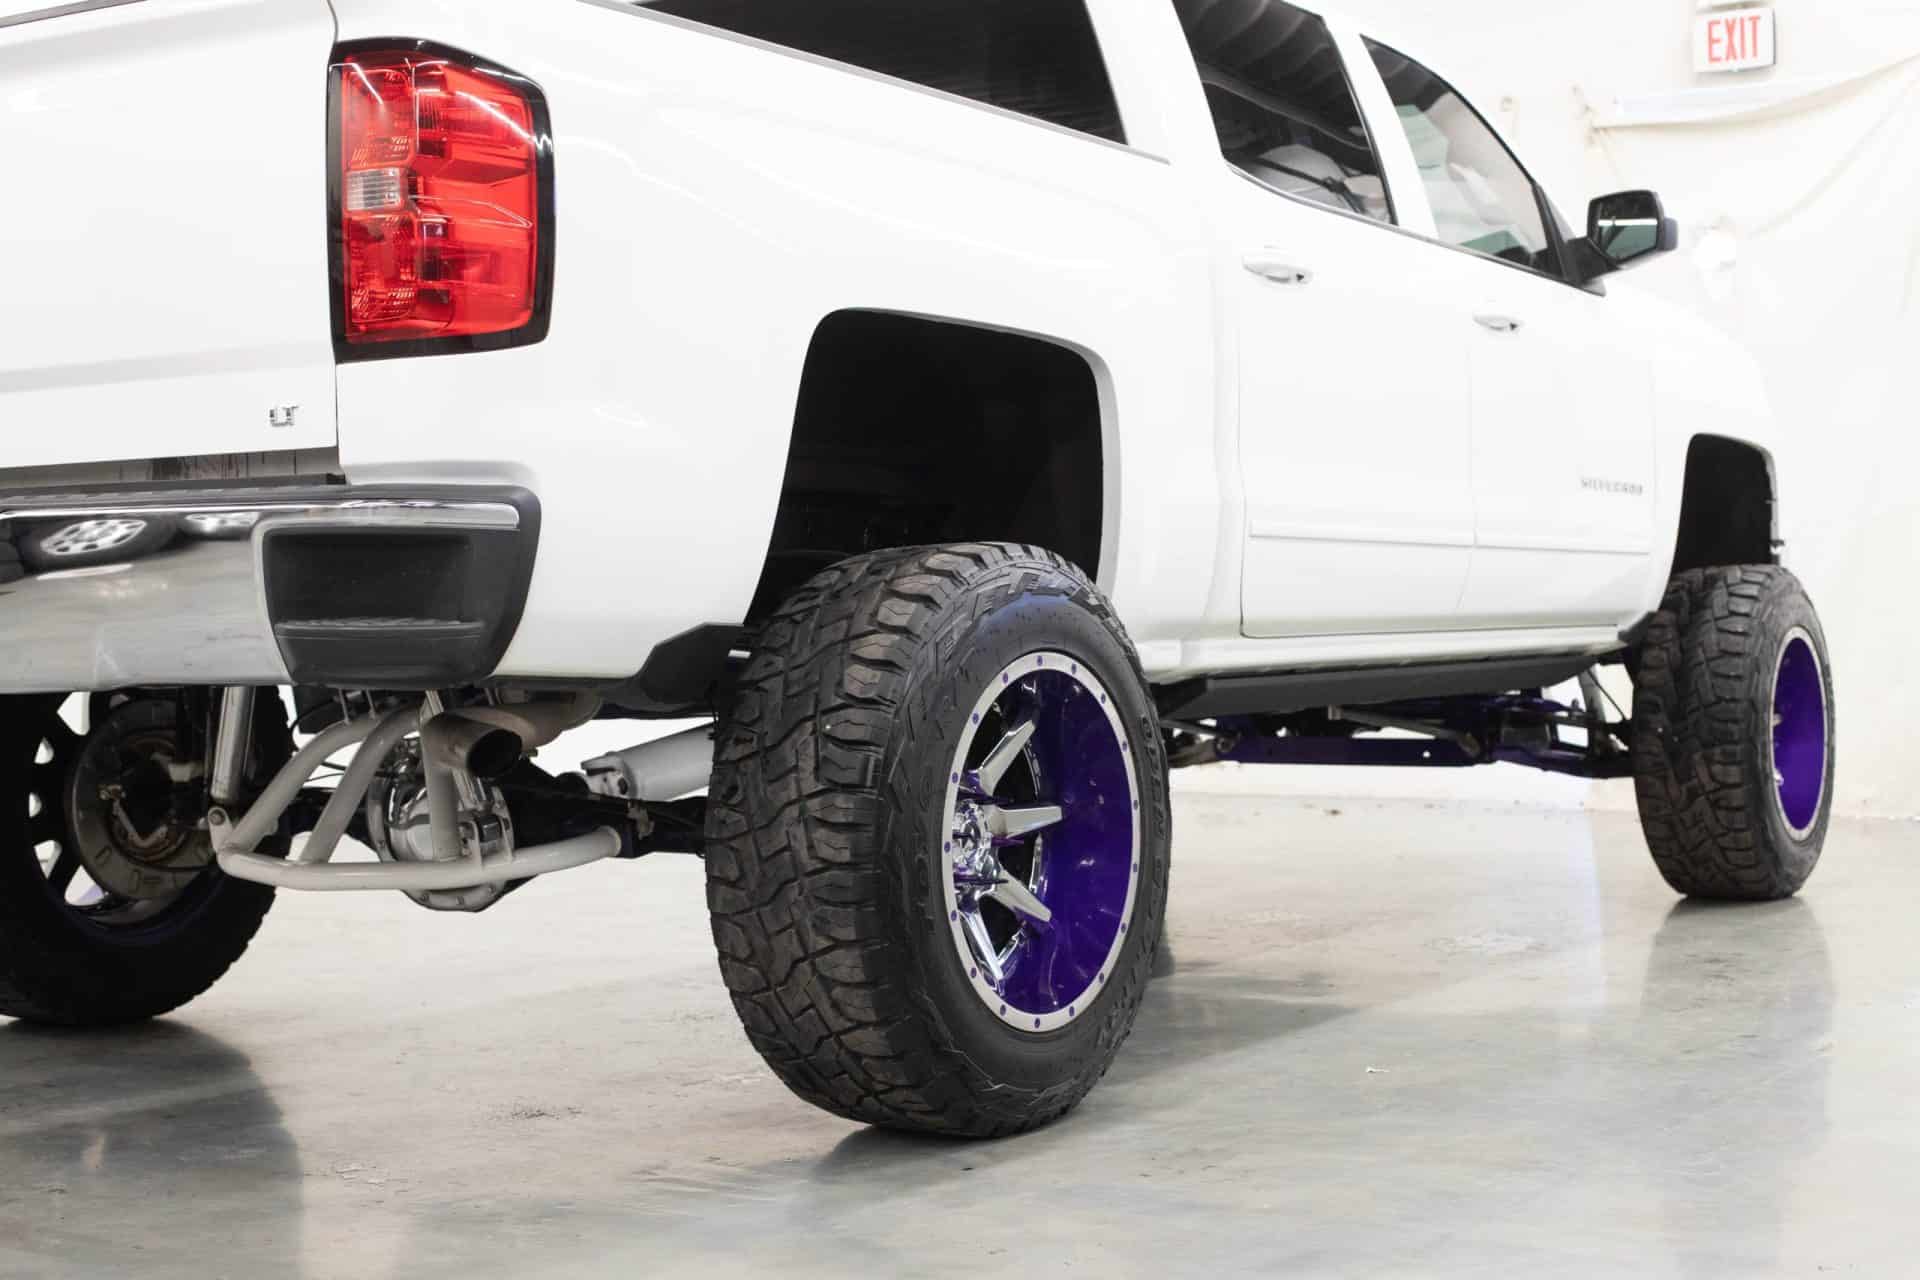 Where Can I Get a Lift Kit Installed Near Me?